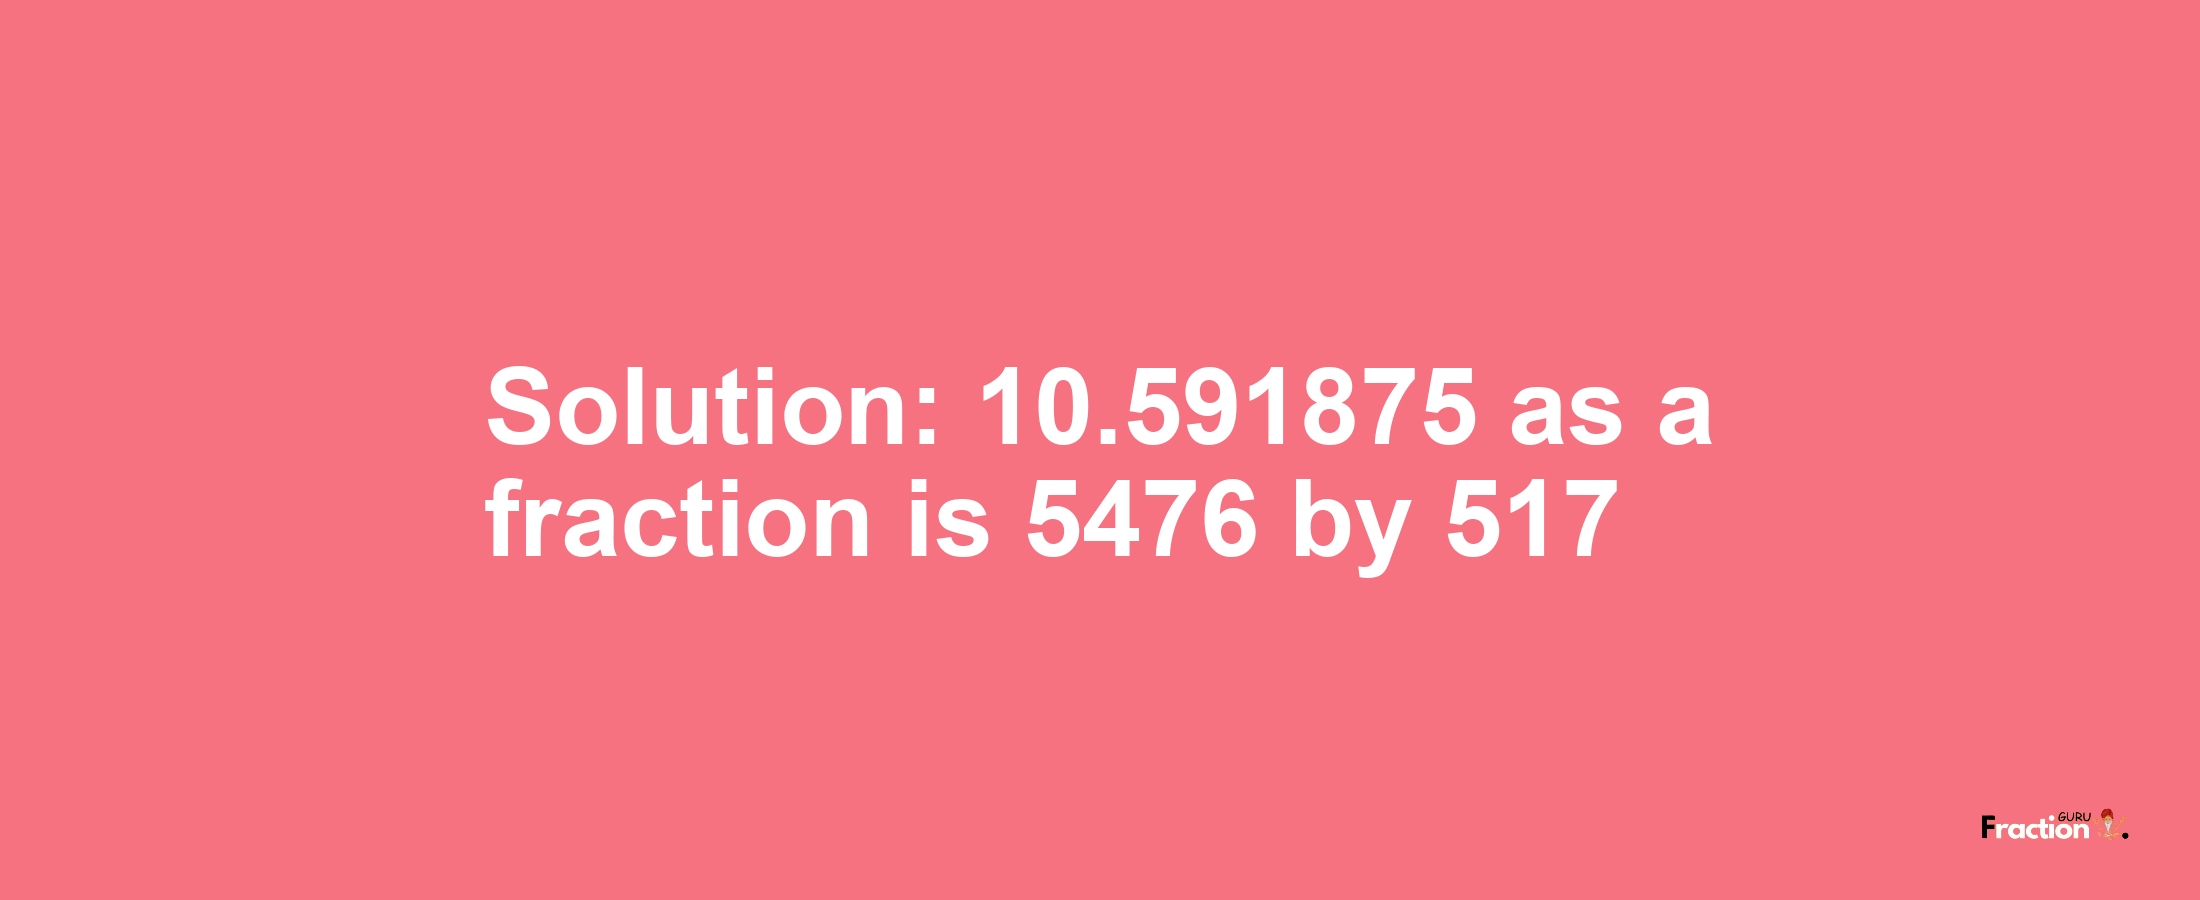 Solution:10.591875 as a fraction is 5476/517